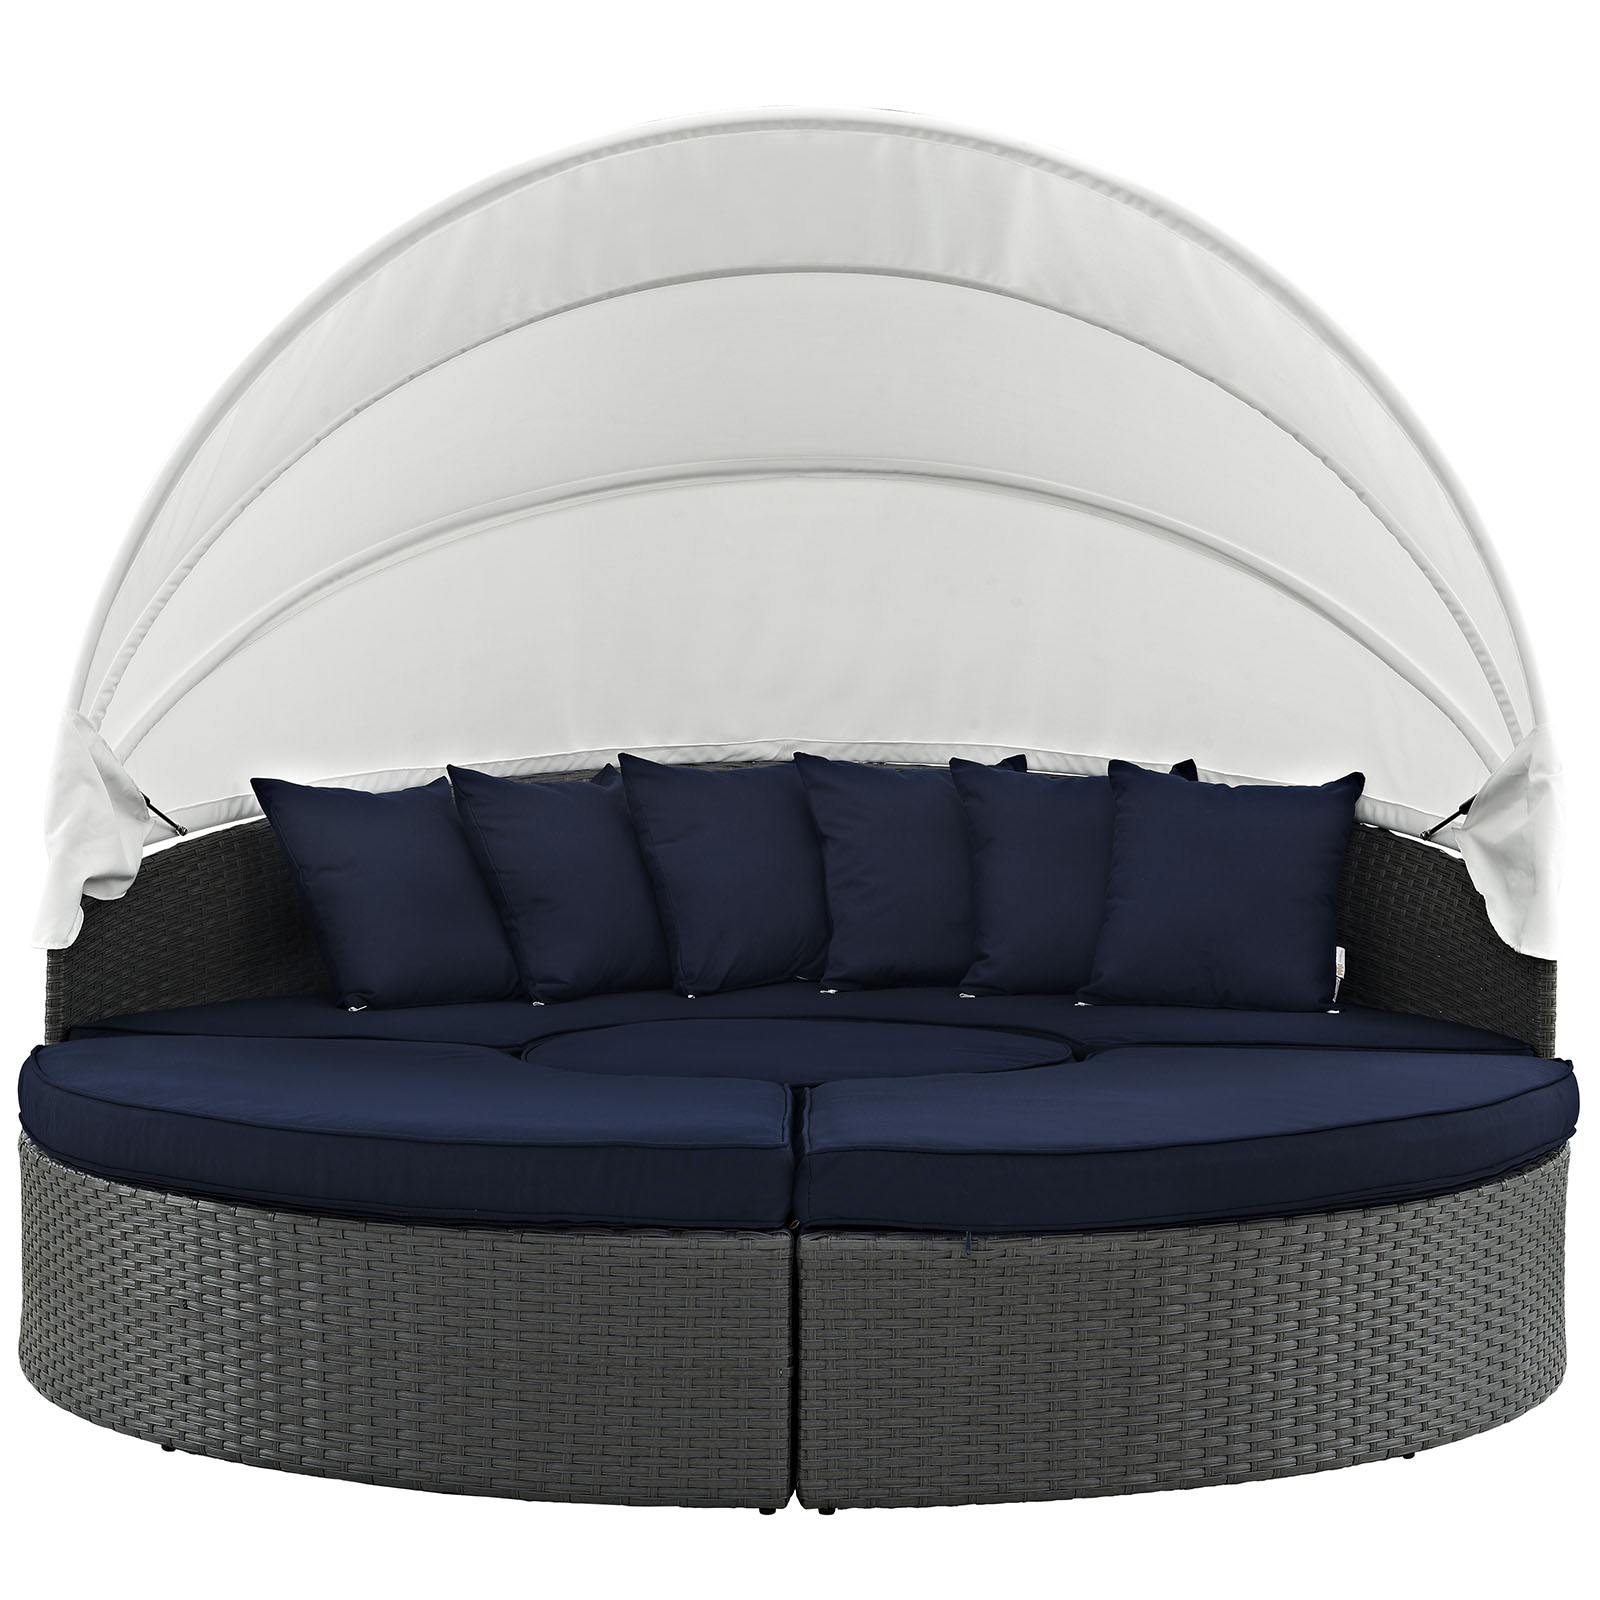 Sojourn Outdoor Patio Sunbrella Daybed In Canvas Navy By Modway